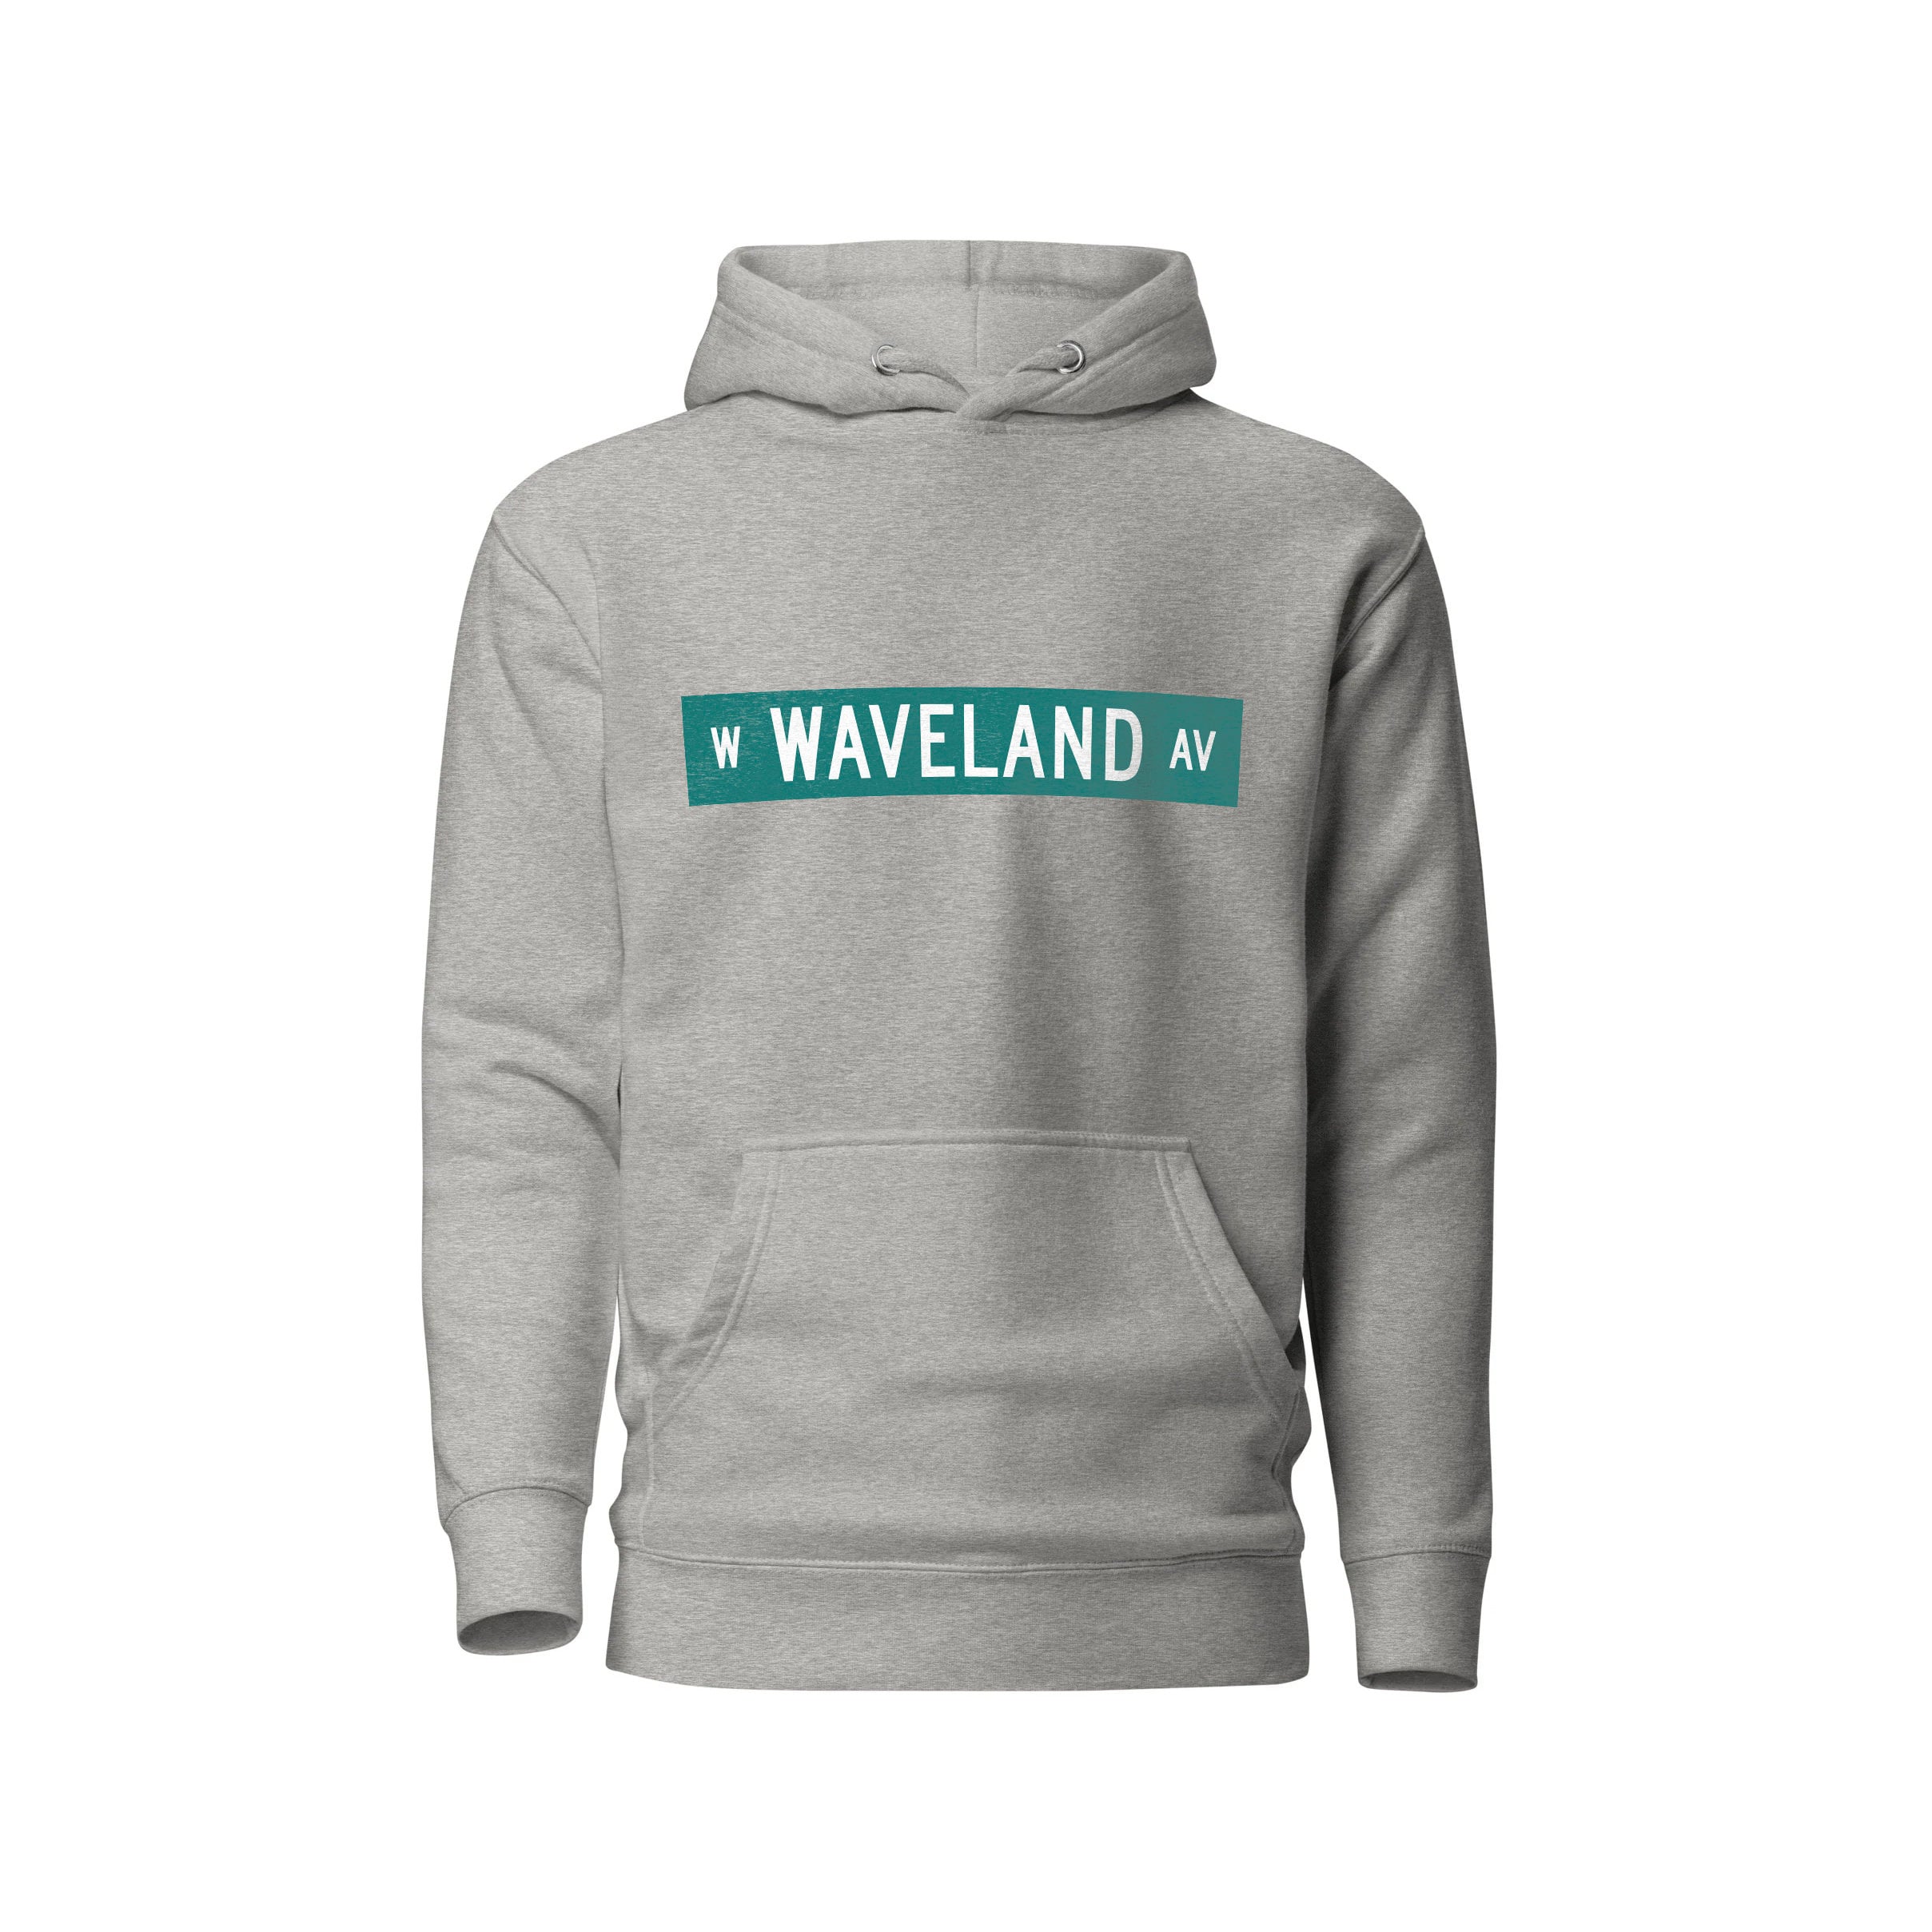 Chicago Cubs Hoodie W Waveland Ave Wrigley Field Street Sign 